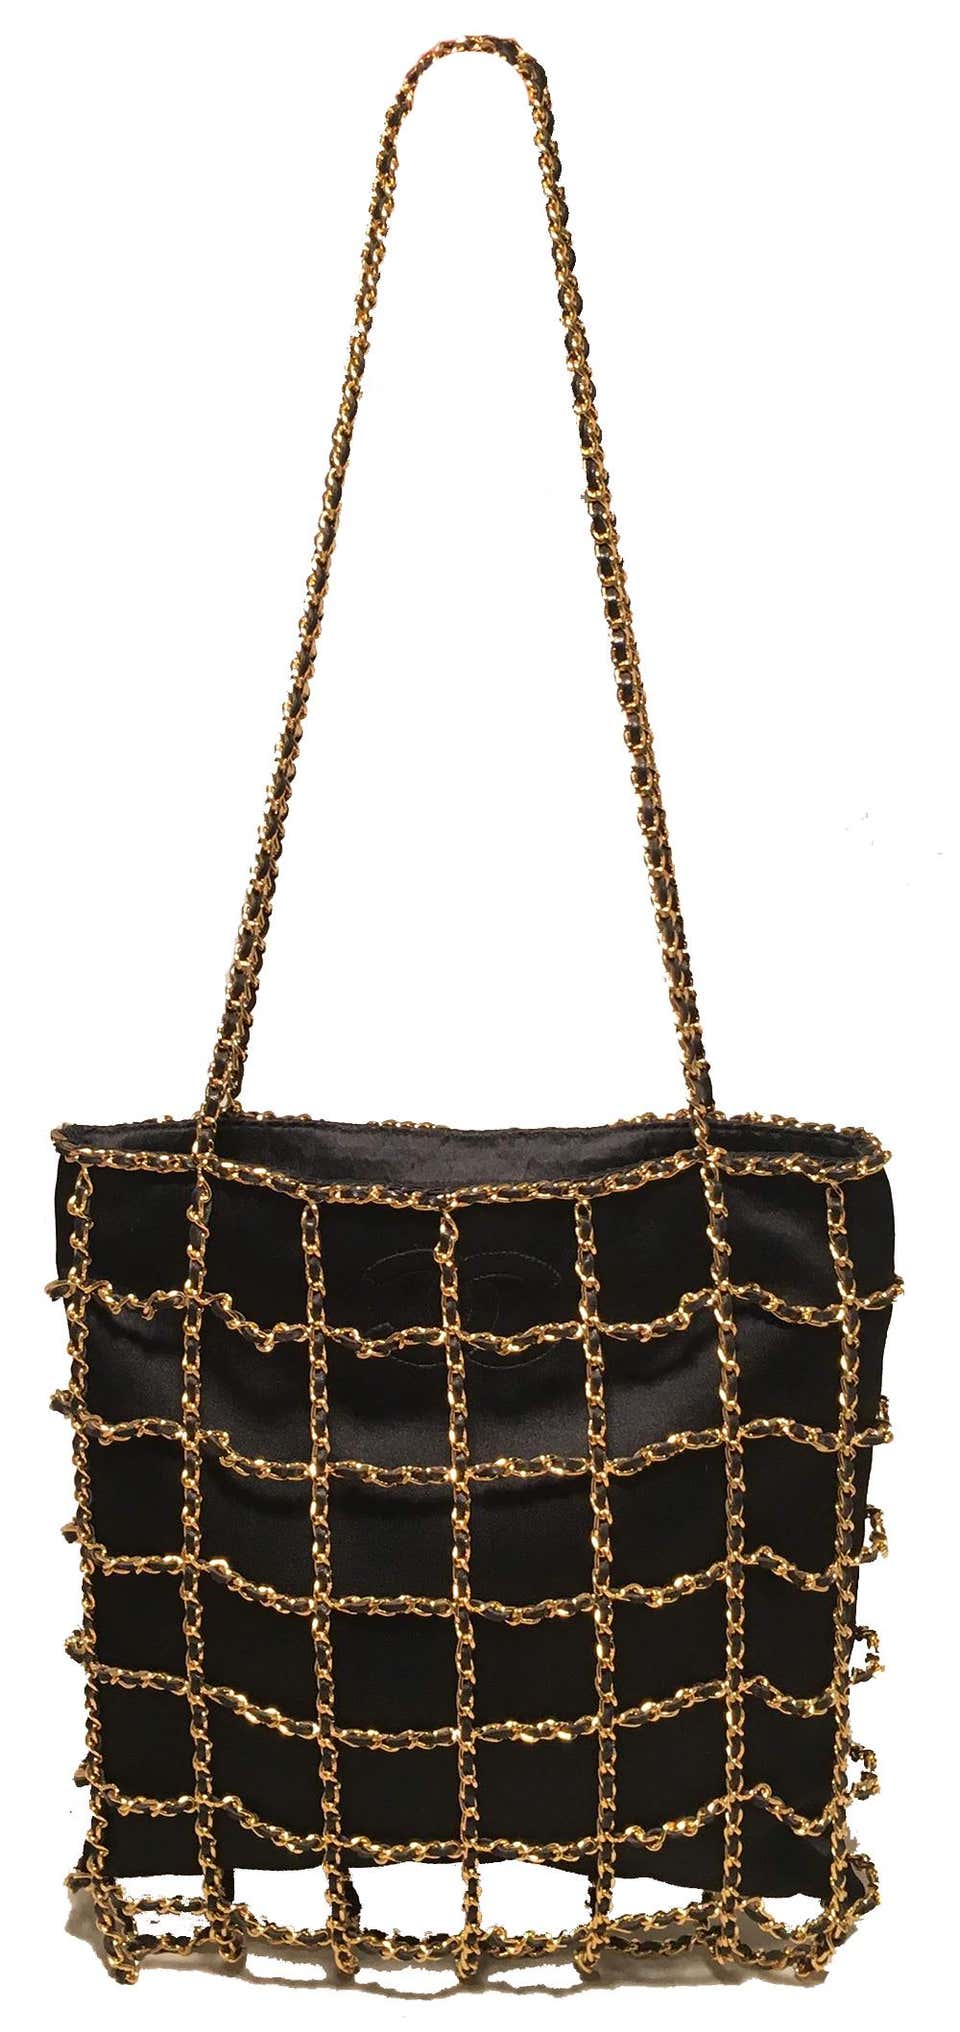 Clear Cage Bag in Lucite with Beading, Gold Tone Frame and Chain Strap,  circa 1990s, Handbags & Accessories, 2021